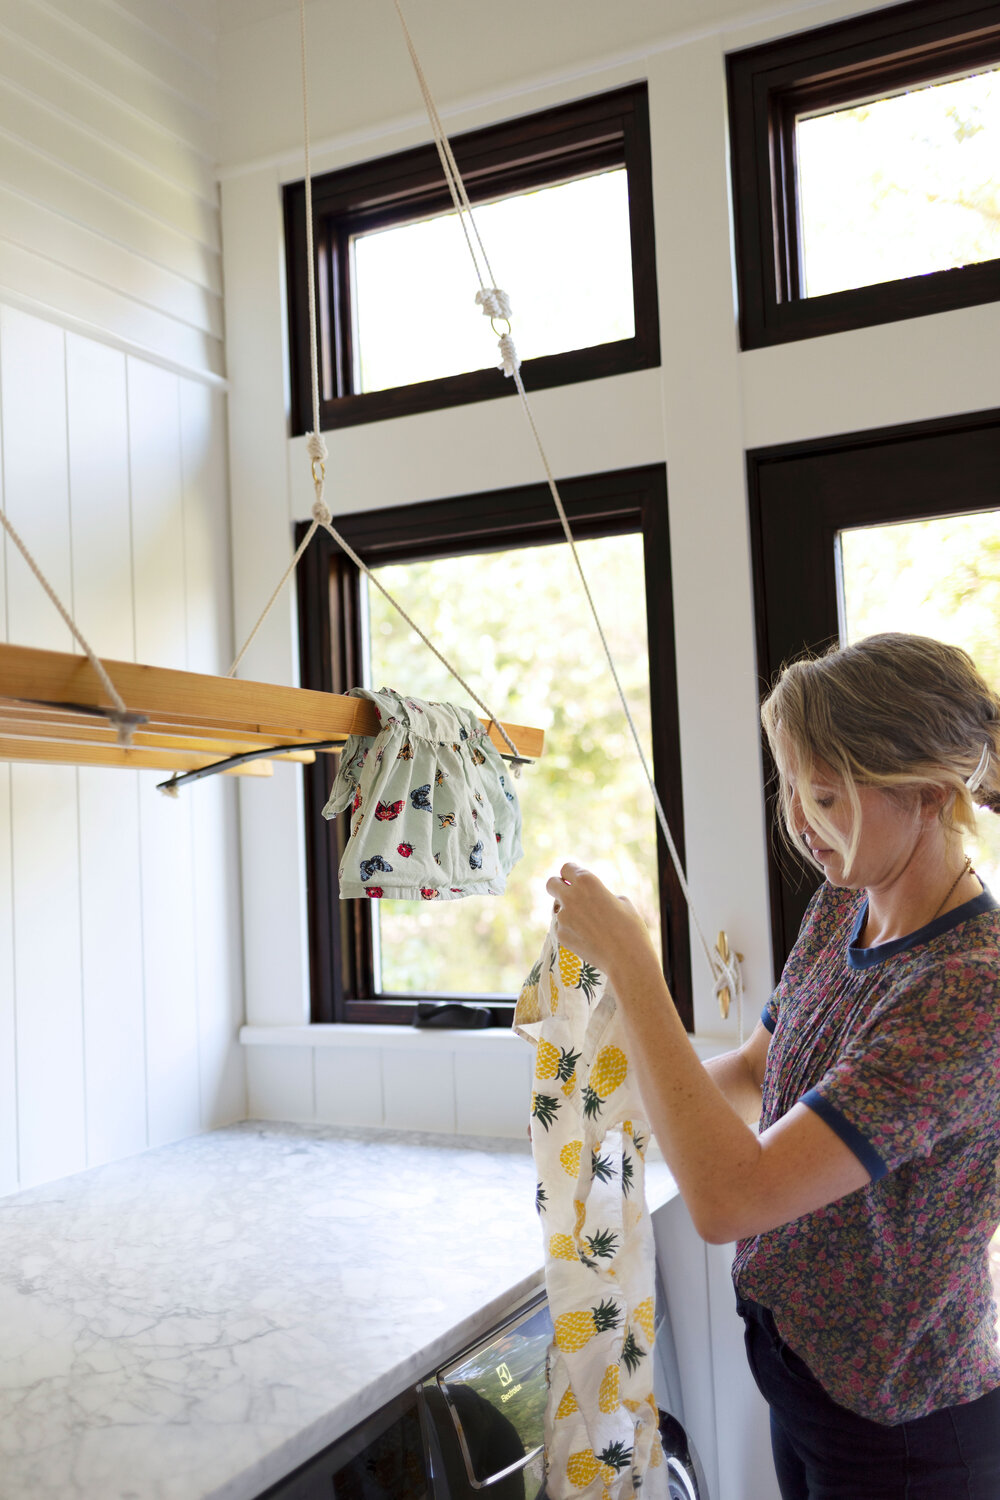 How To Build A Hanging Laundry Rack Aka An English Style Airer The Grit And Polish